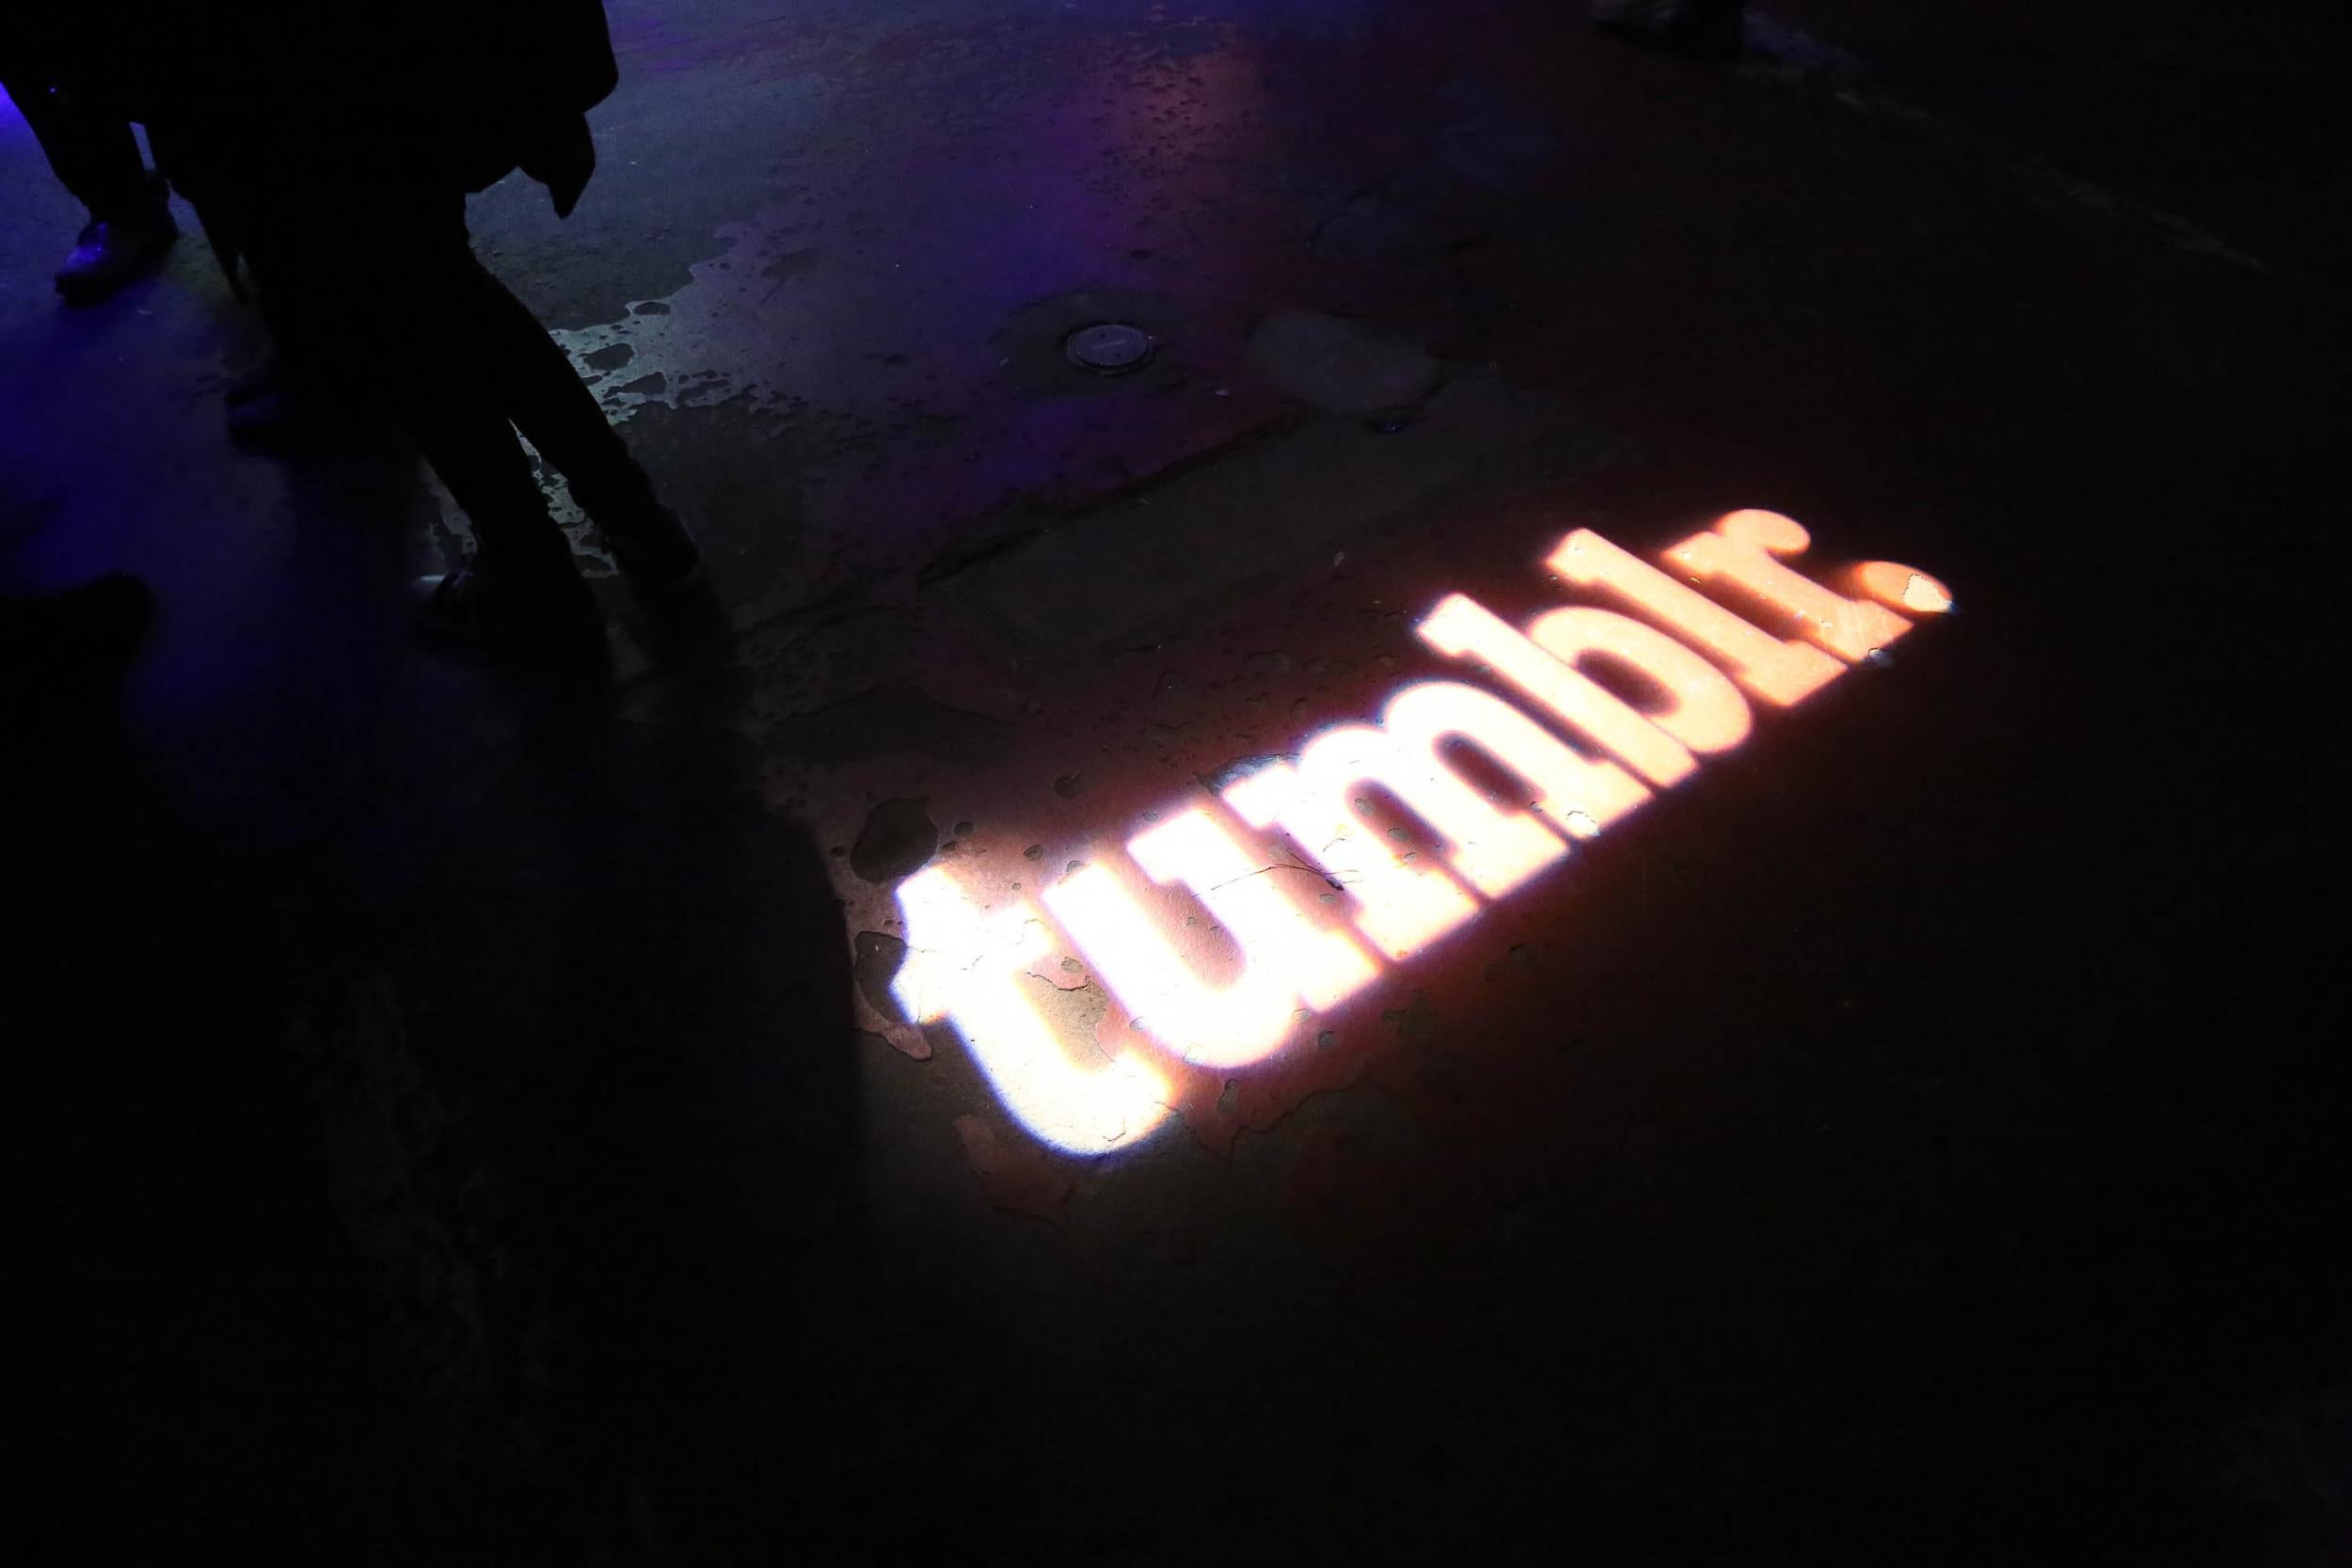 Instant messaging is a long-overdue feature for Tumblr